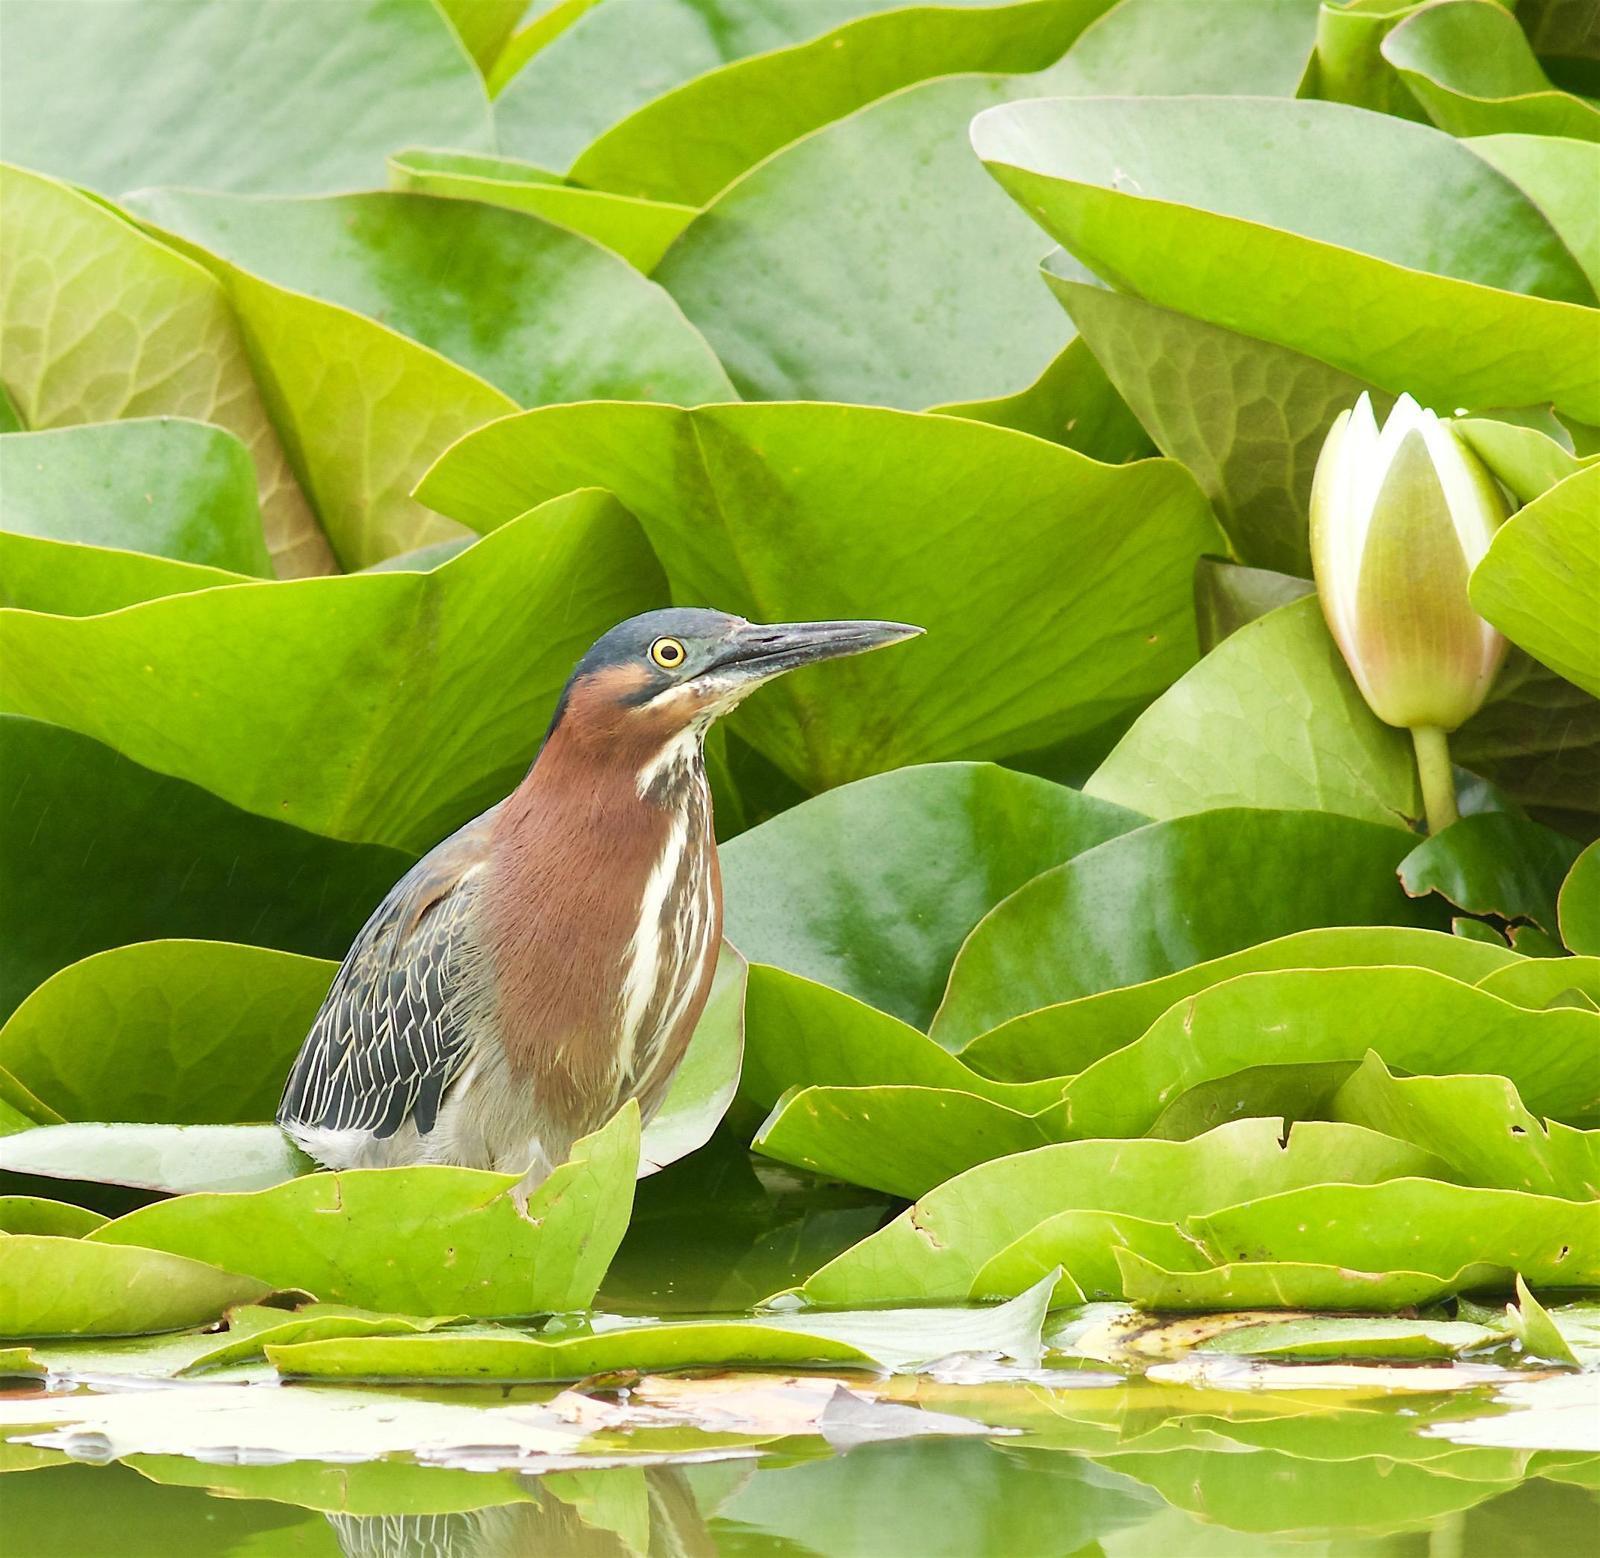 Green Heron Photo by Kathryn Keith